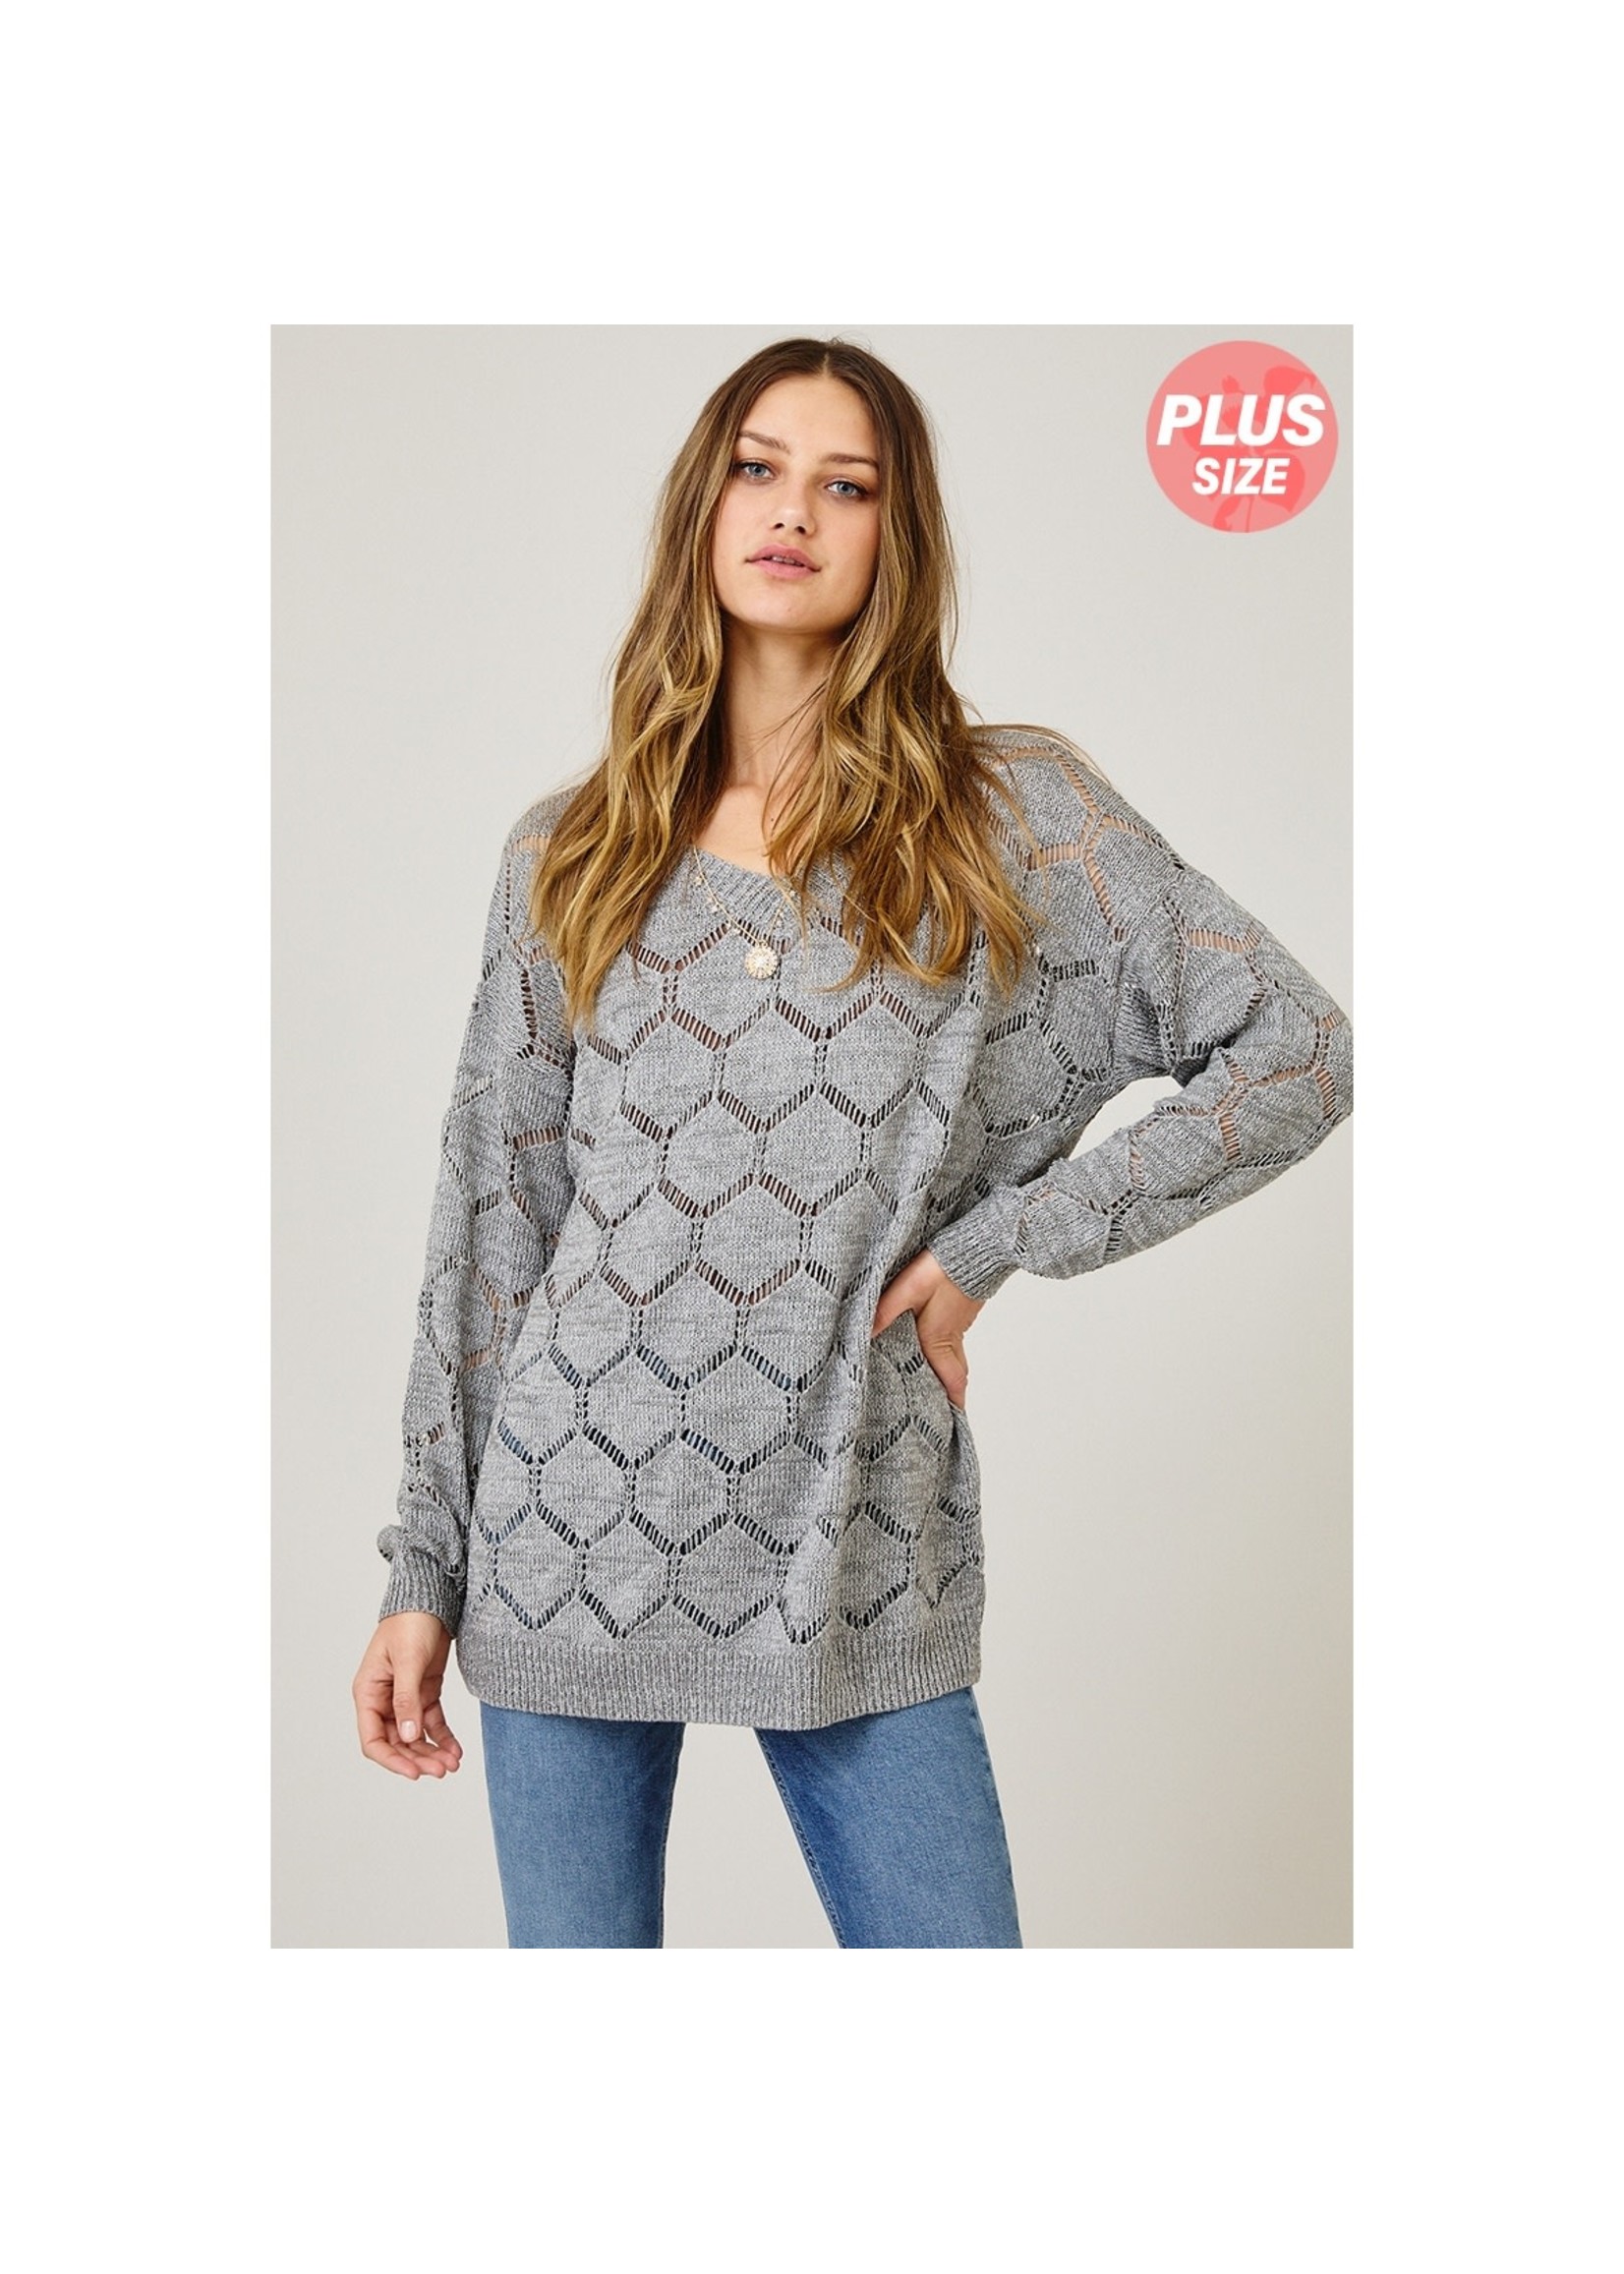 CES Femme Grey knitted sweater